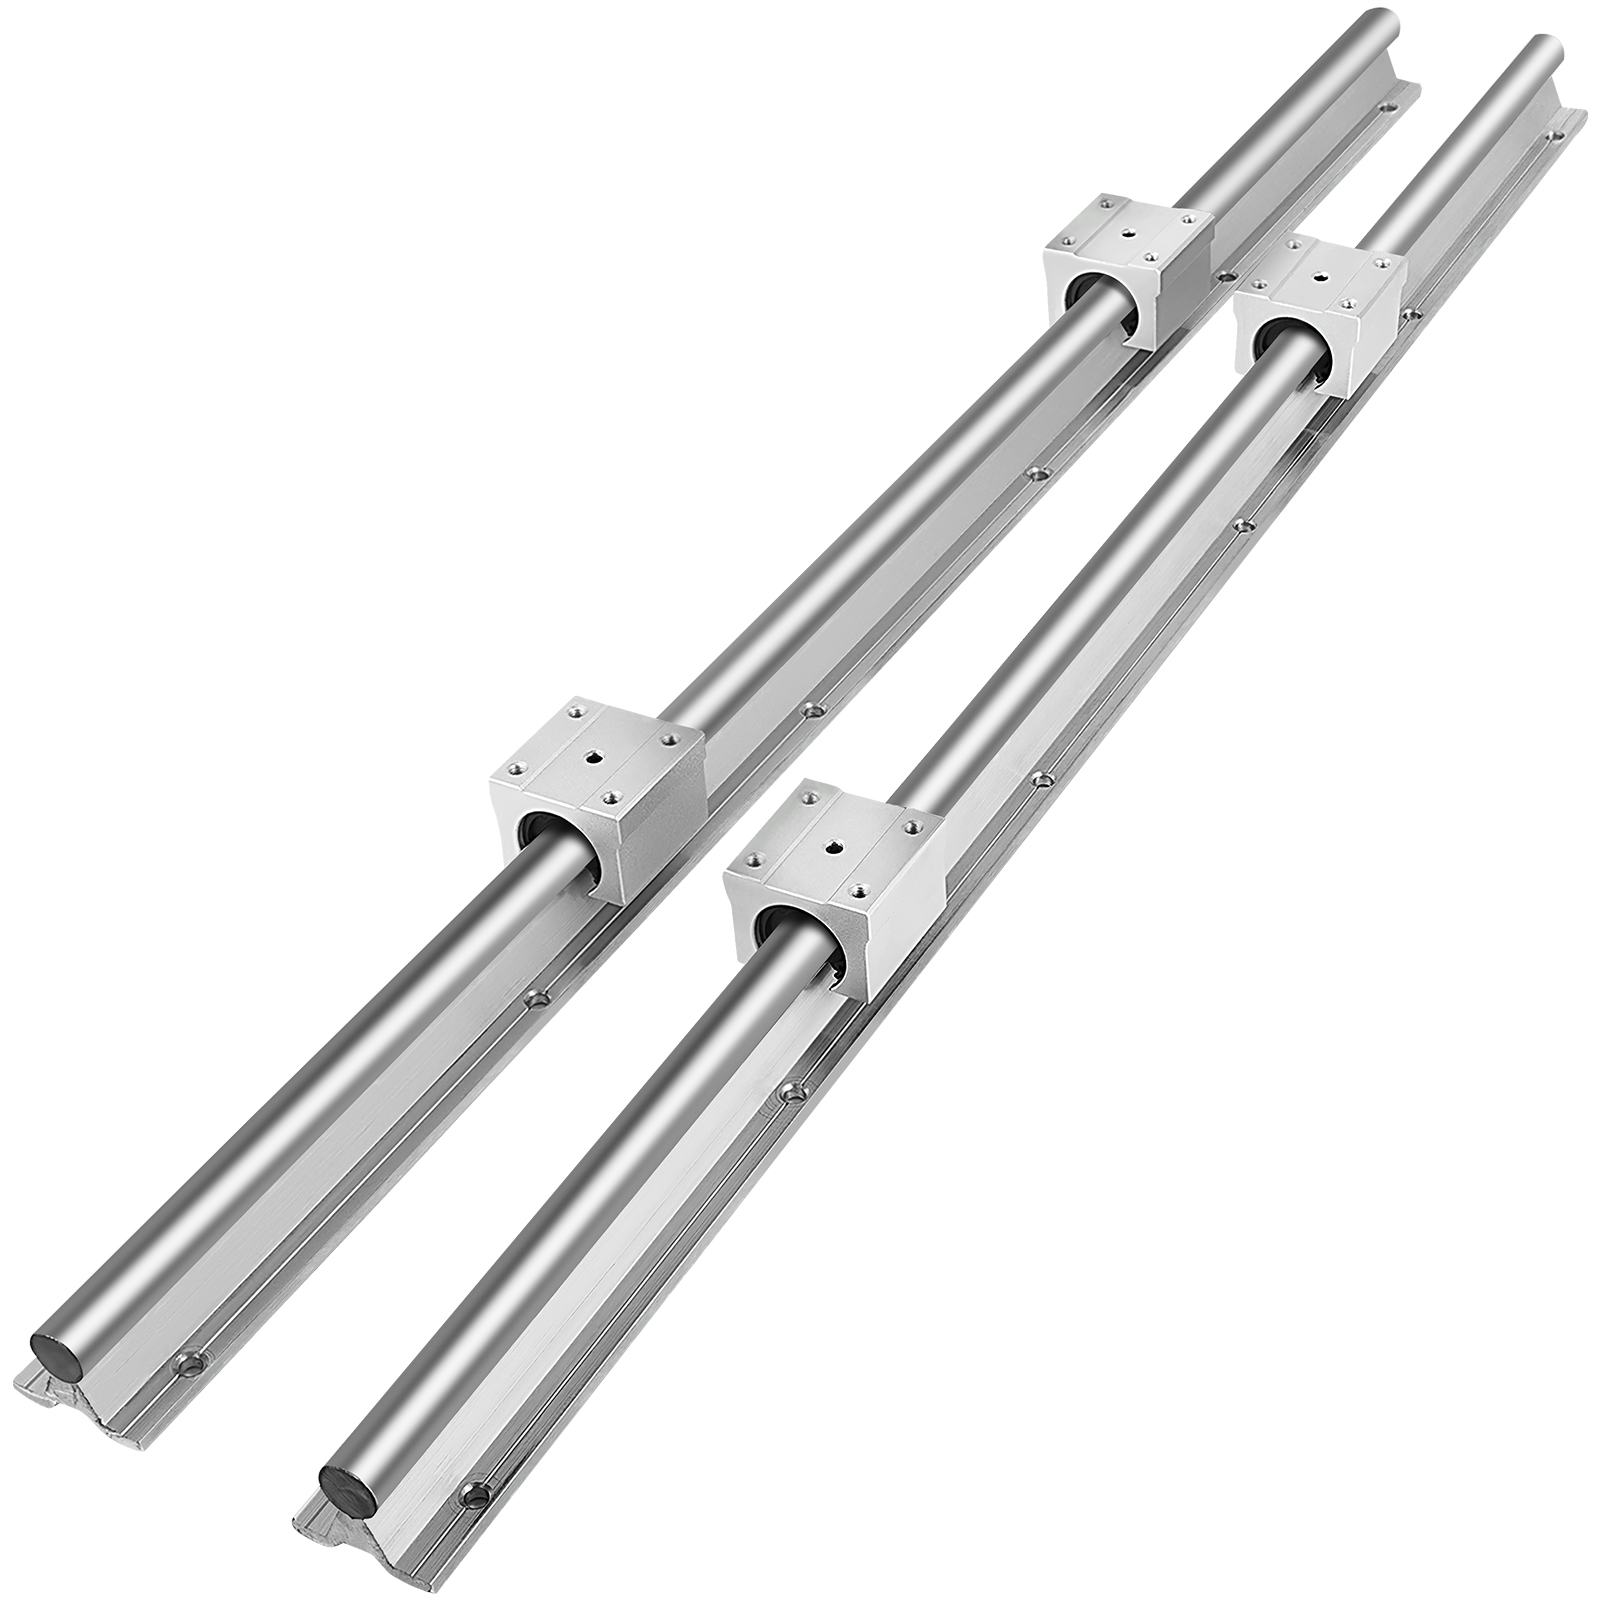 Mills 2pcs 300mm 12mm Linear Rail,4pcs Bearing Slide Block,with Adjustable Handle,Pricise Position,for DIY CNC Routers Lathes 